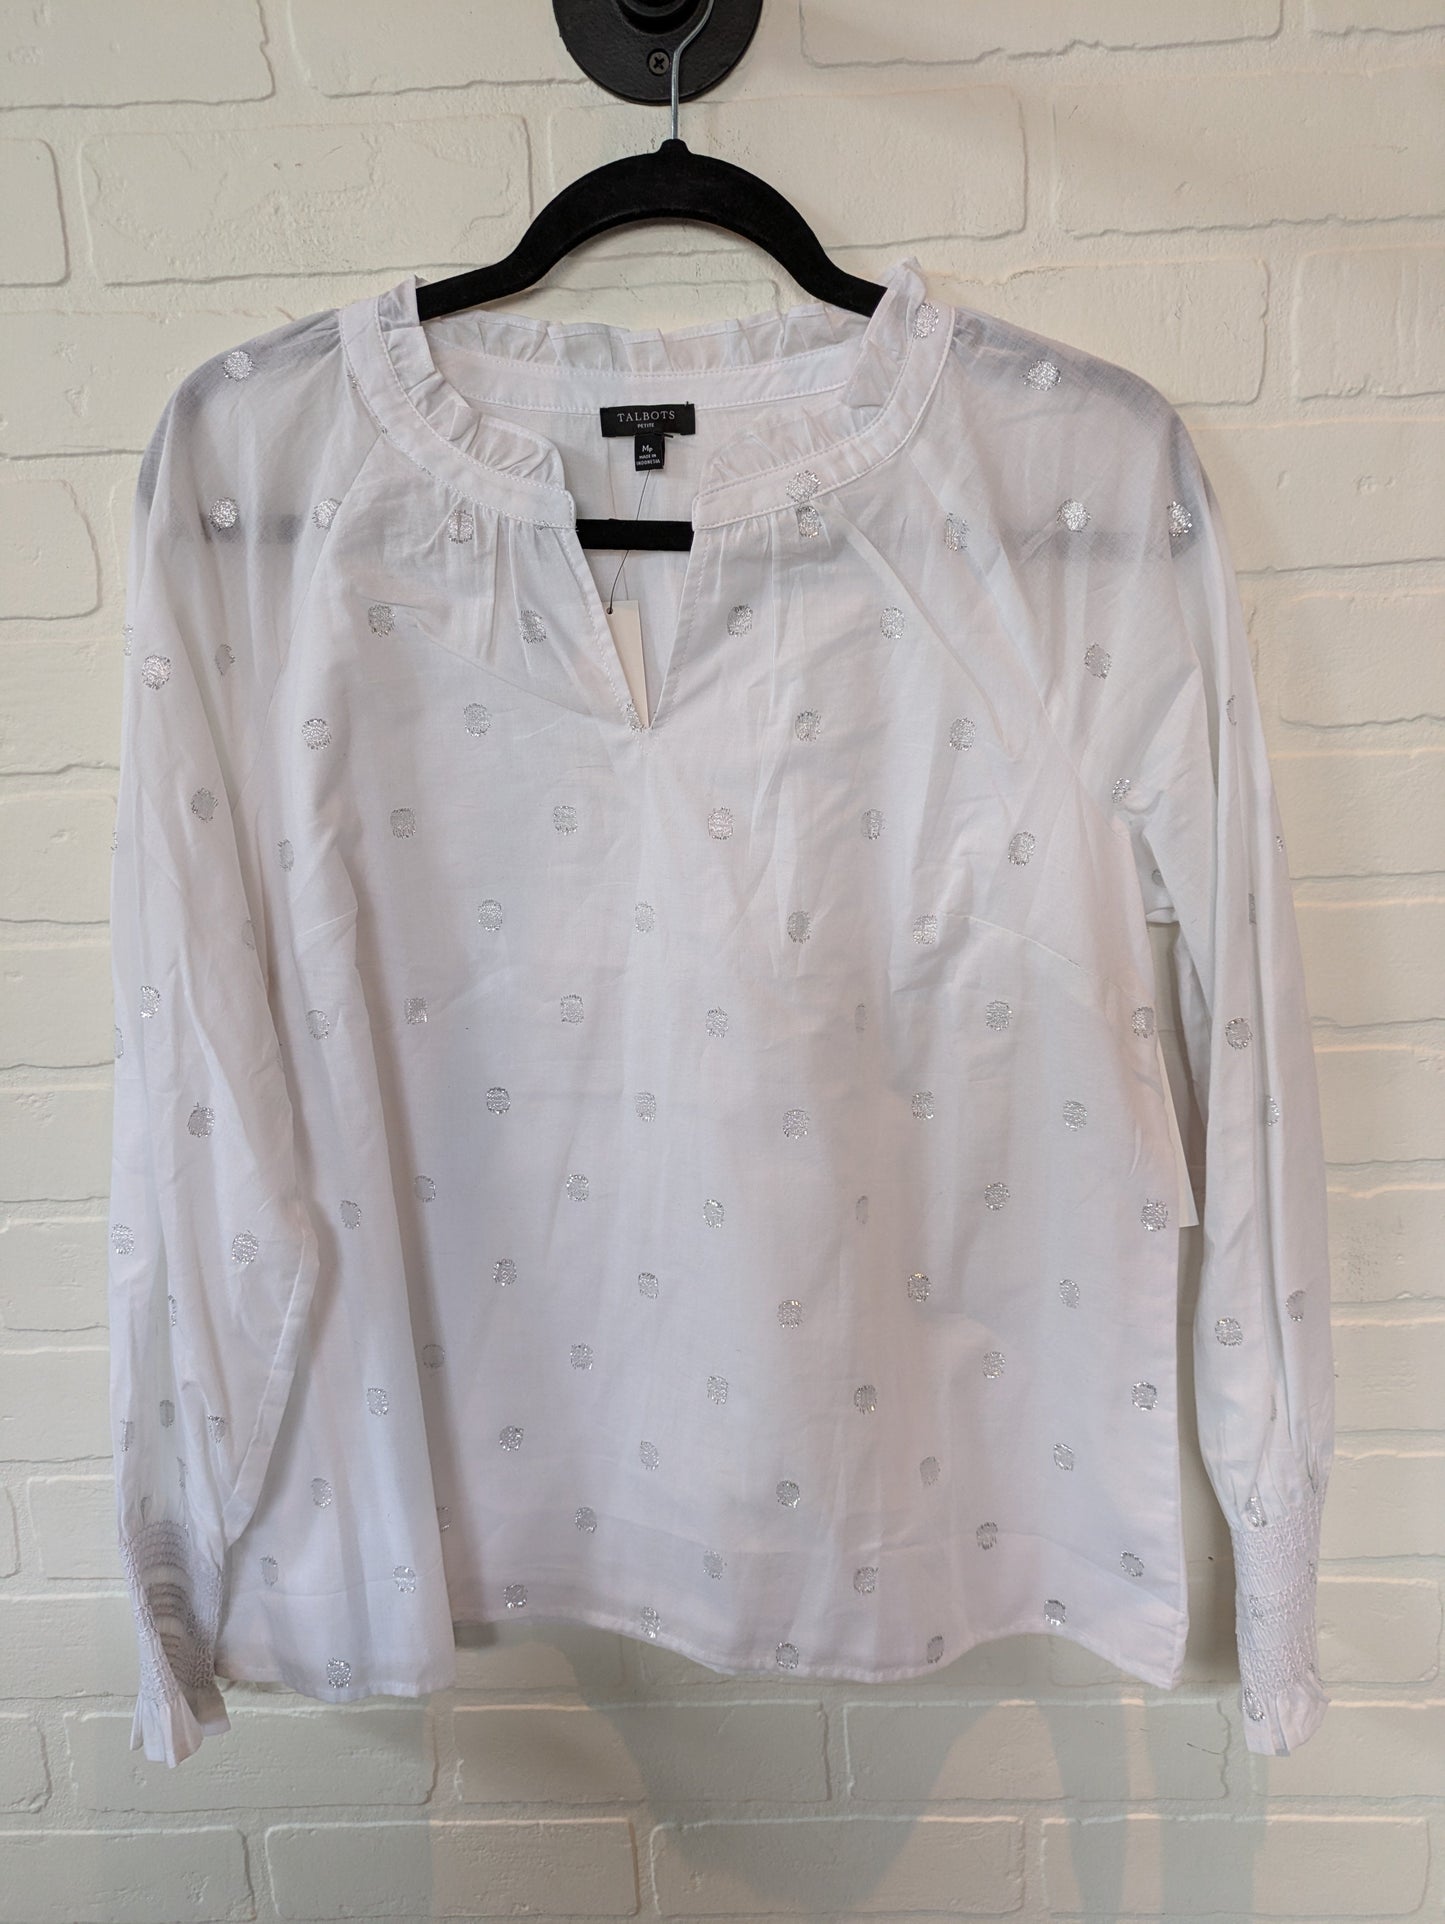 White Top Long Sleeve Talbots, Size M